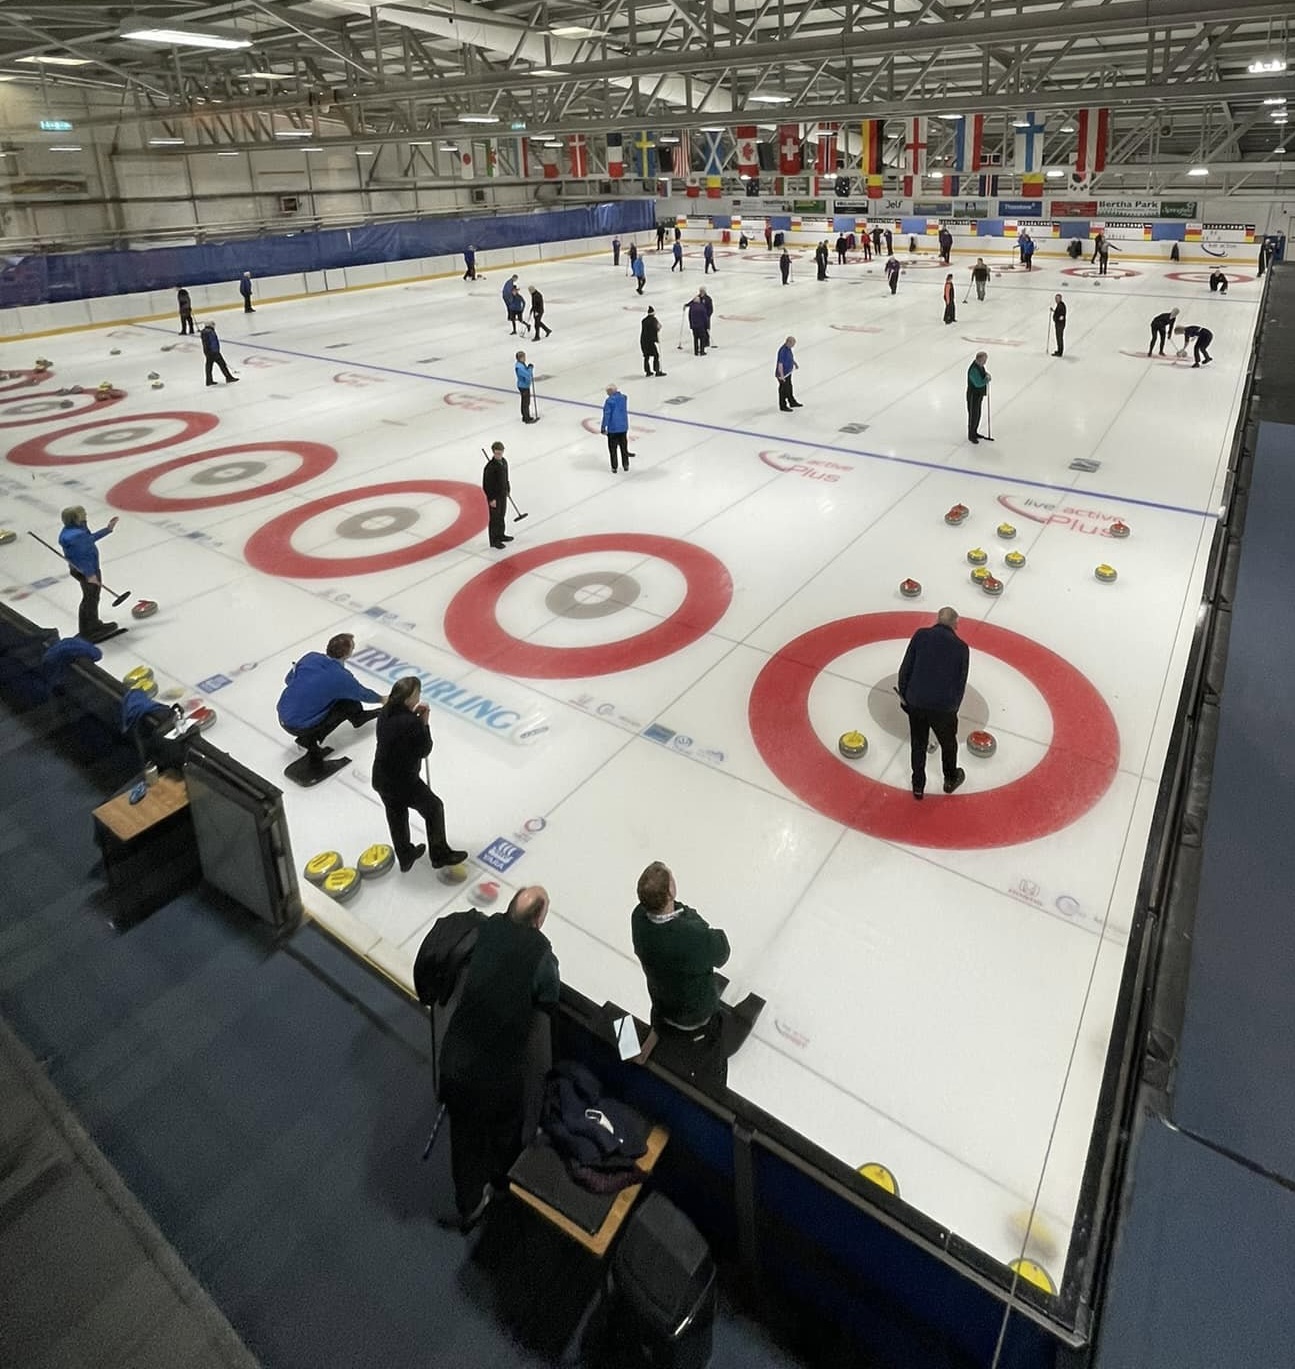 Try Curling Open Day